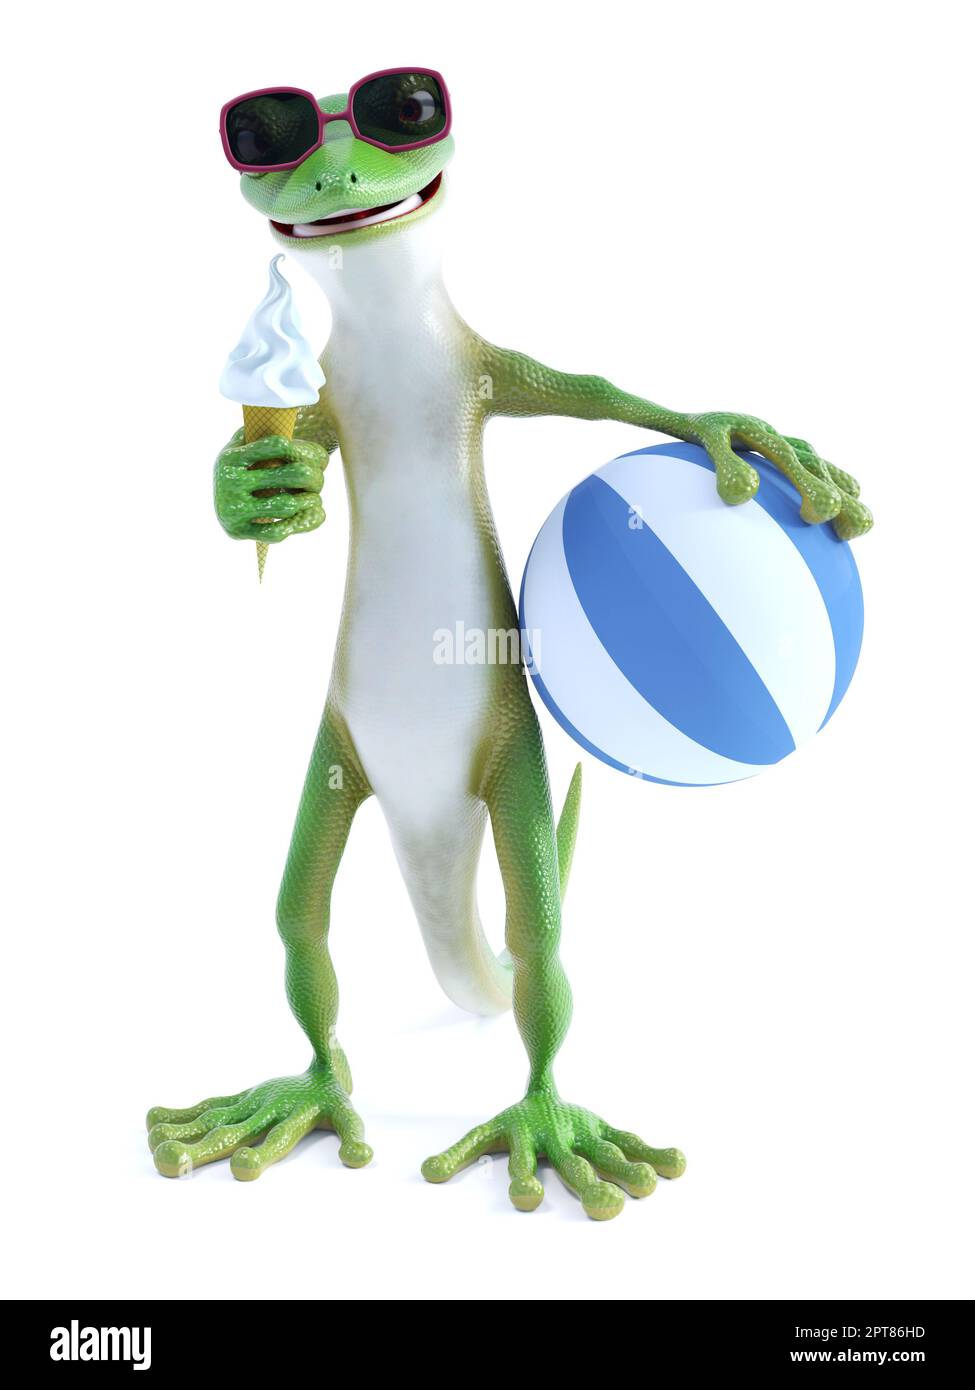 3D rendering of a cool green gecko or lizard wearing sunglasses and eating  ice cream while holding a blue striped beach ball. White background Stock  Photo - Alamy